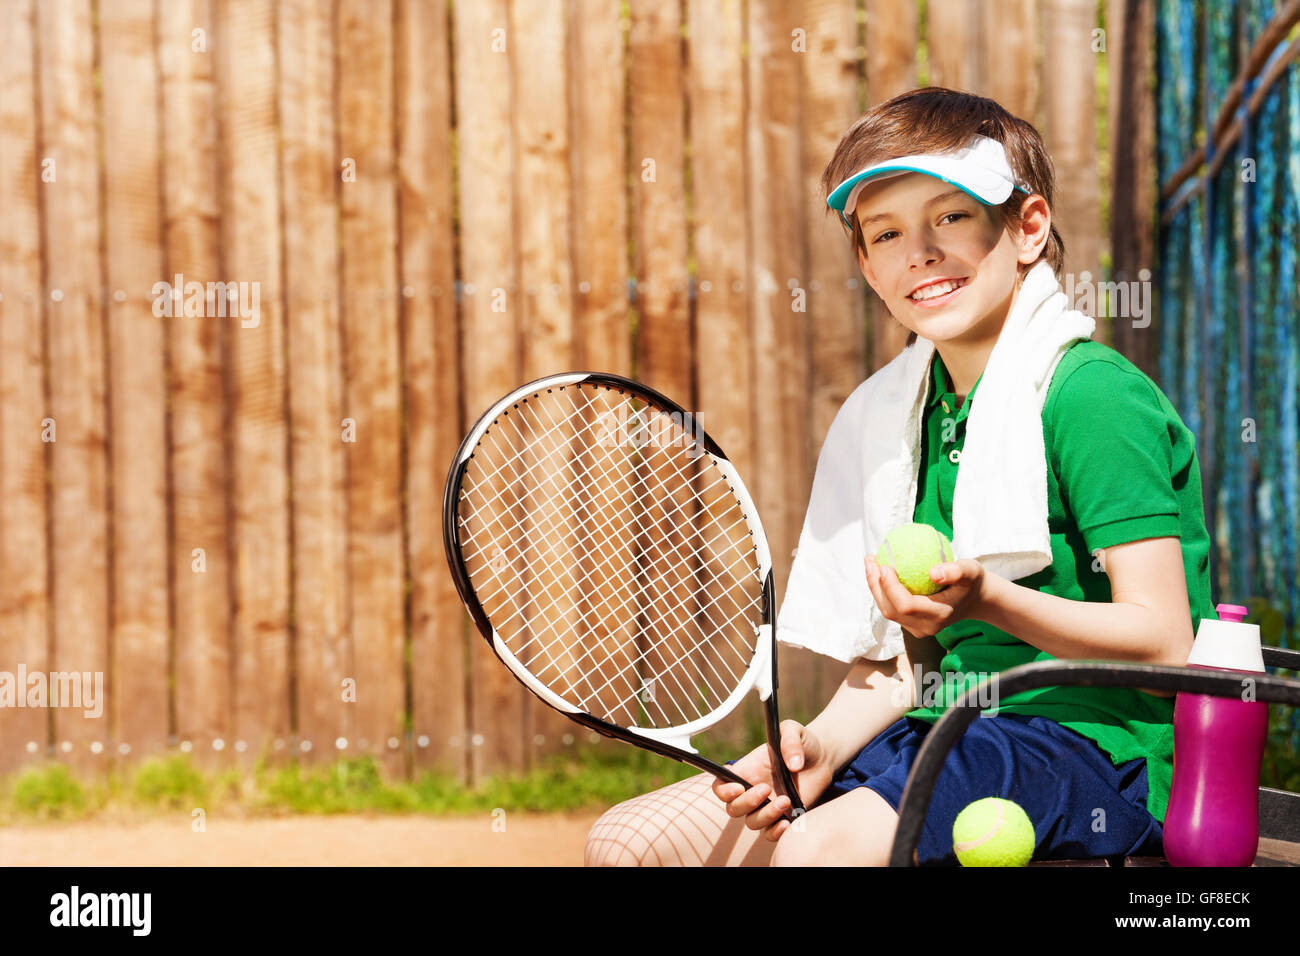 Young tennis player sitting on a bench after game Stock Photo